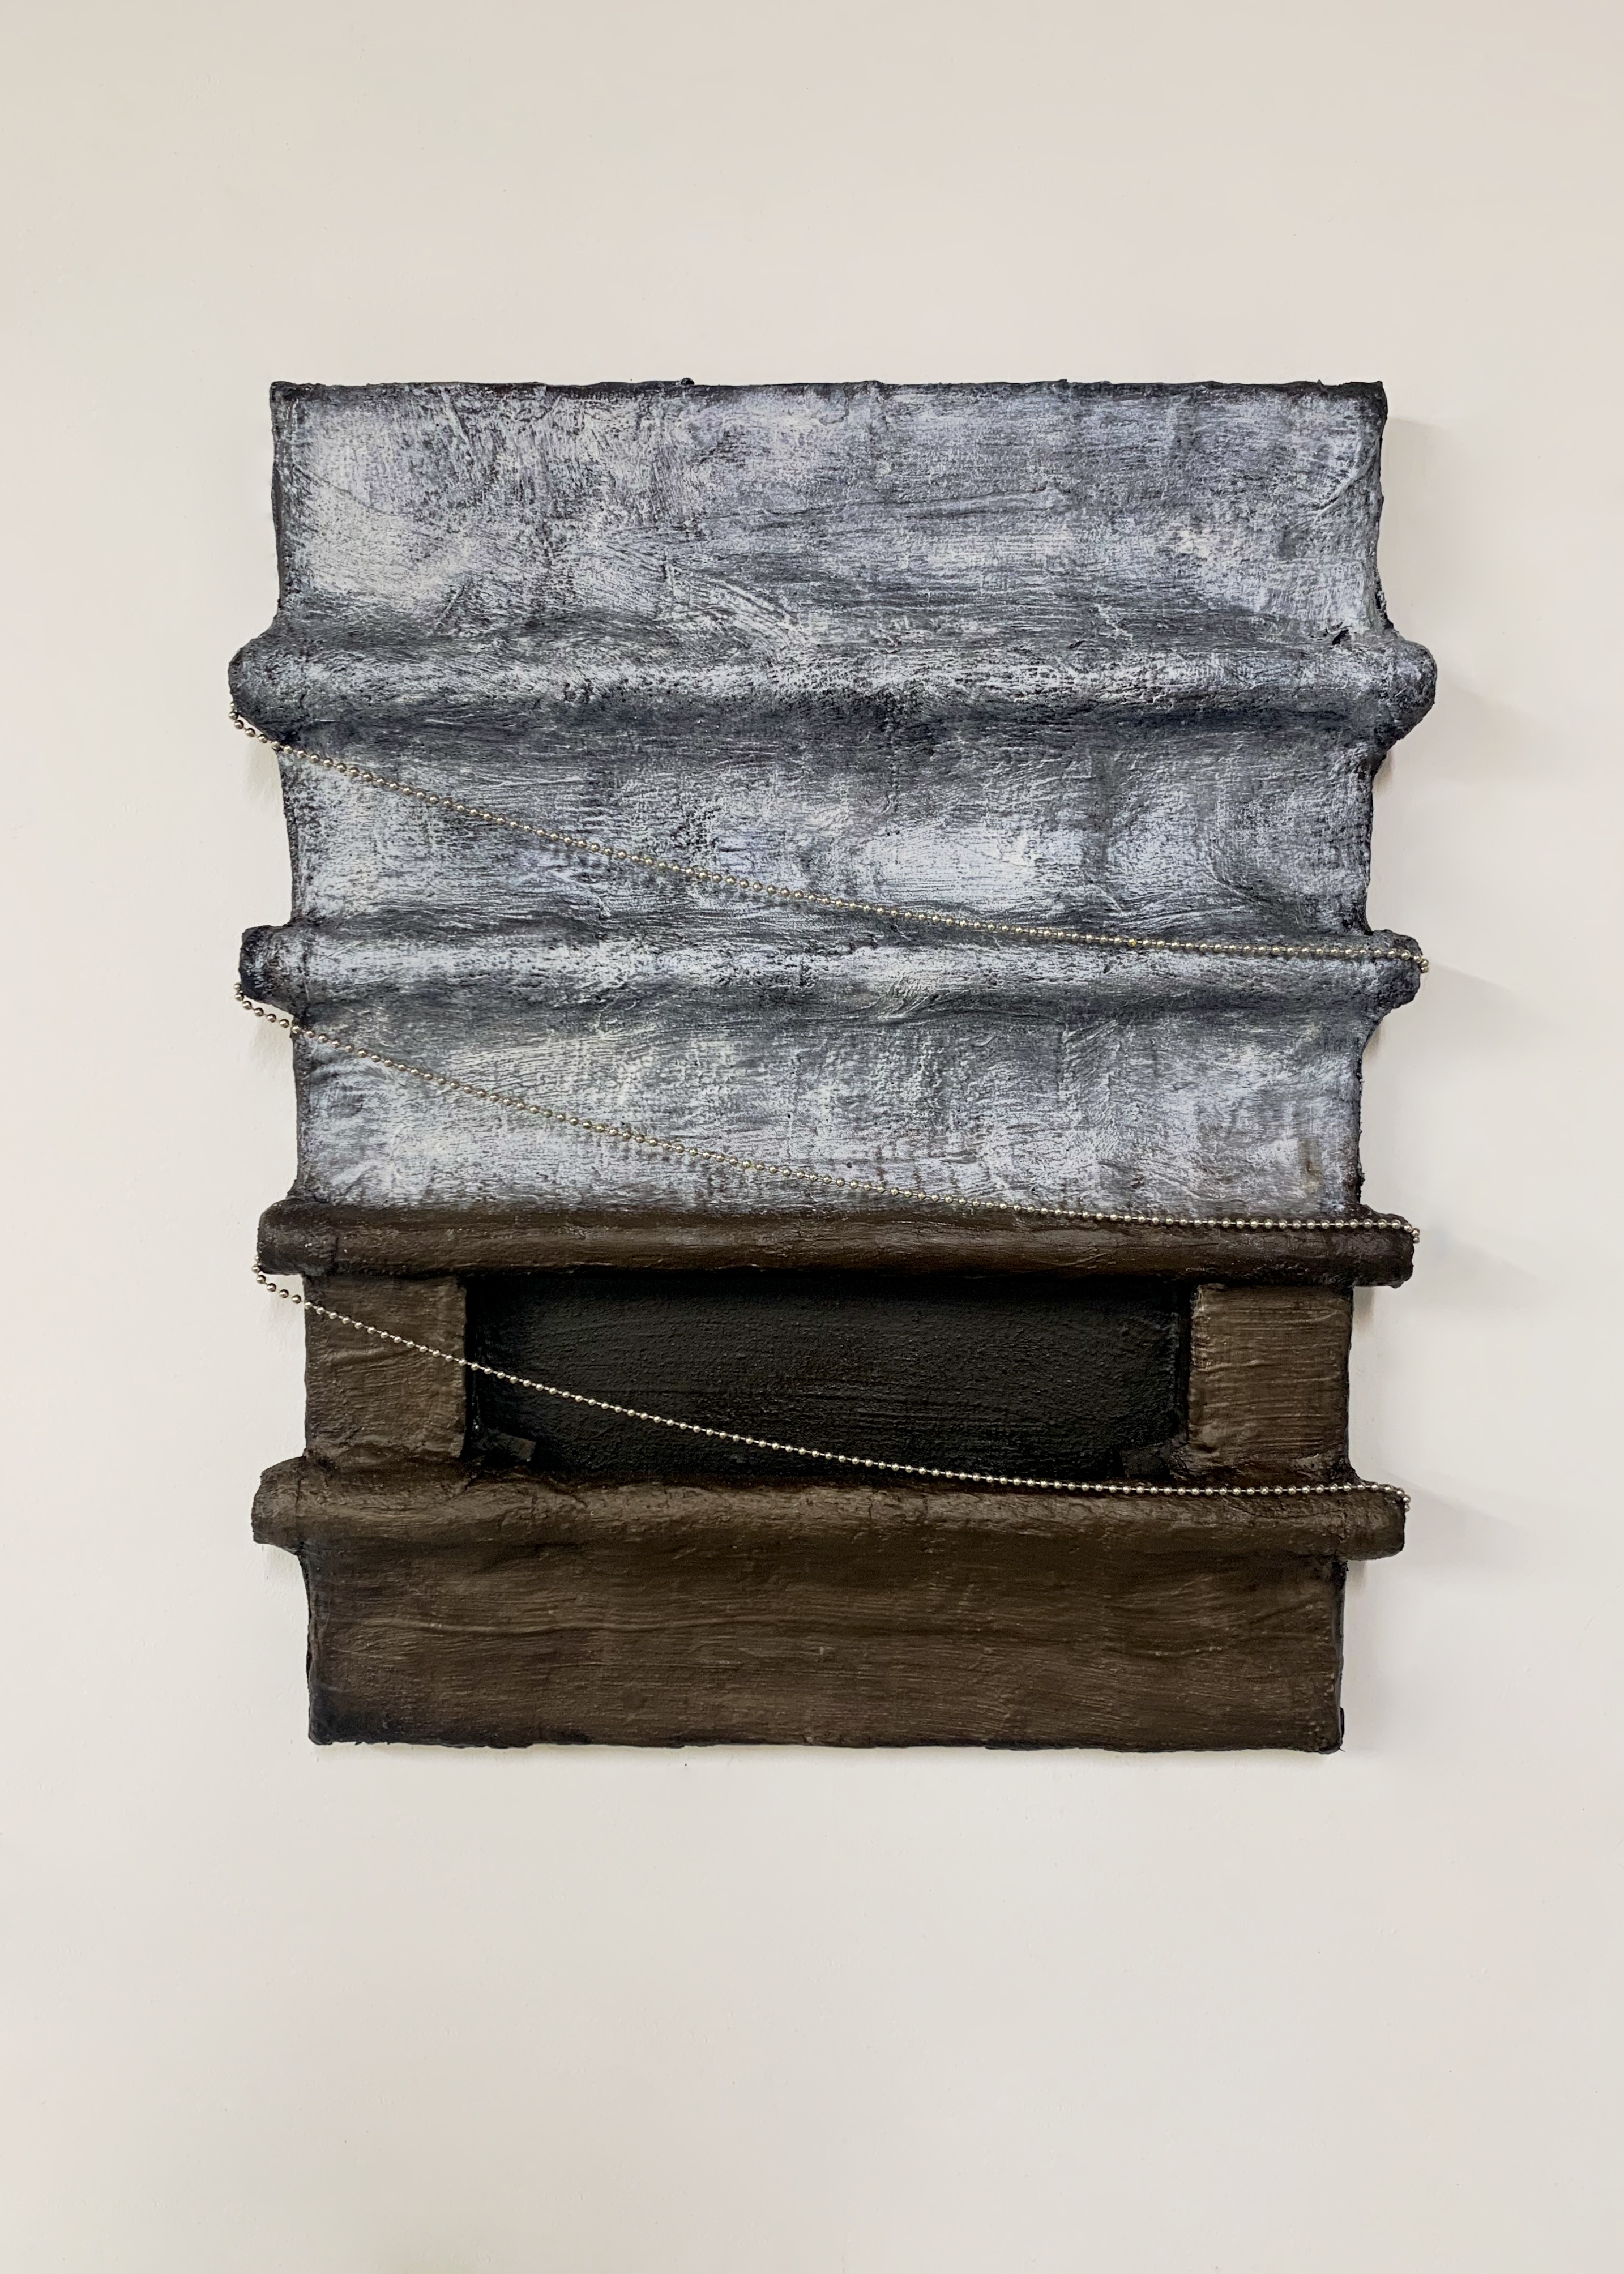 Painting by Rachel Walters in plaster, plumbers pipe, sink chain and oil on canvas